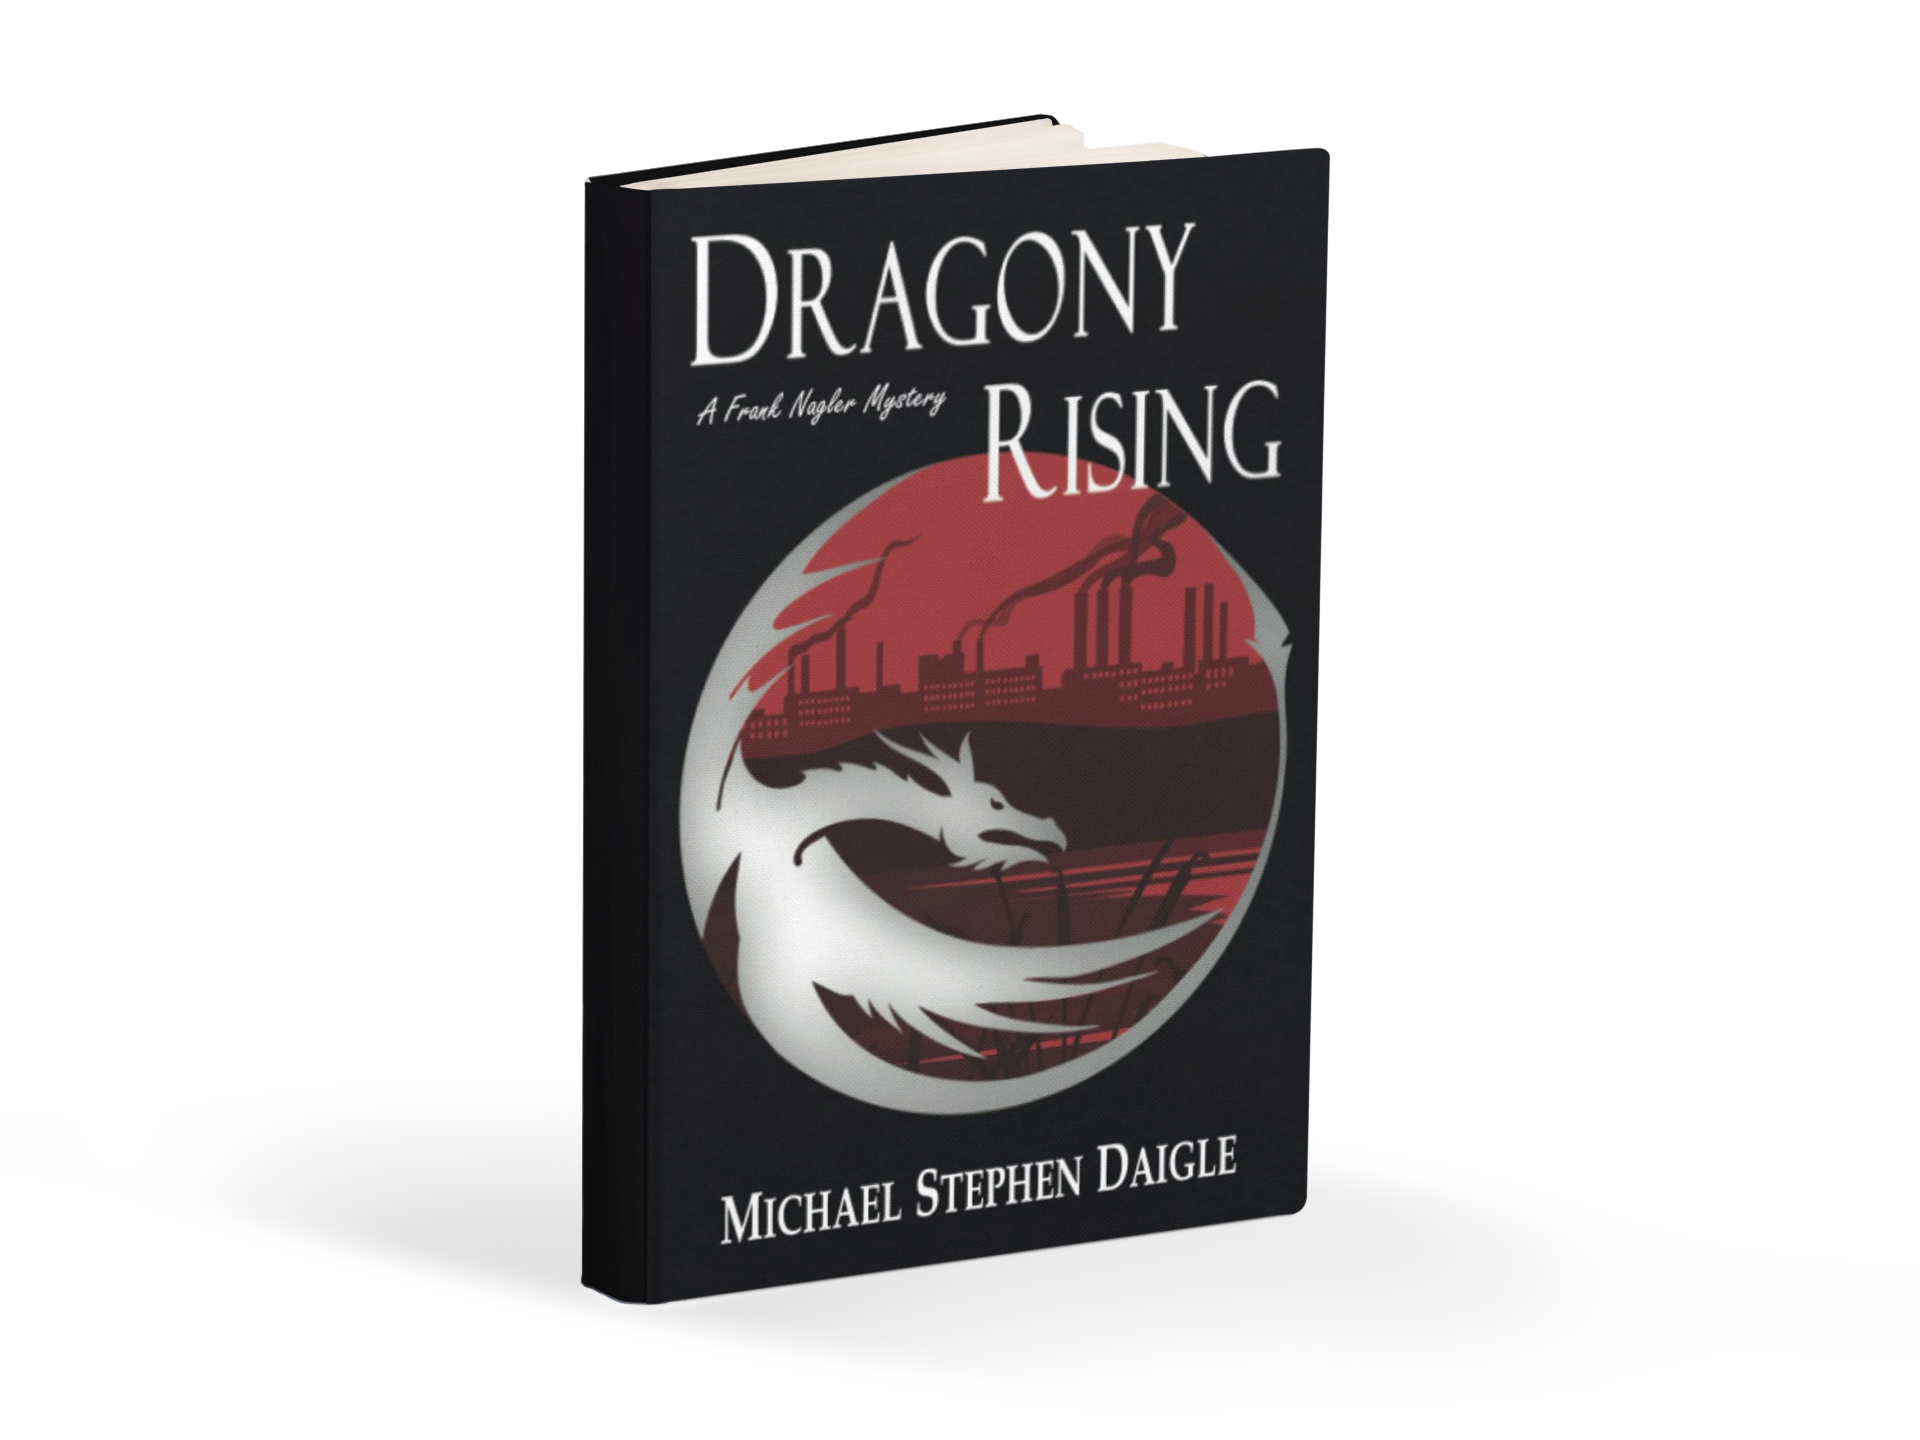 Dragony Rising by Michael Stephen Daigle is a Hard-Hitting Police Thriller that Explores the State of Justice, Corruption and Human Nature in America Today